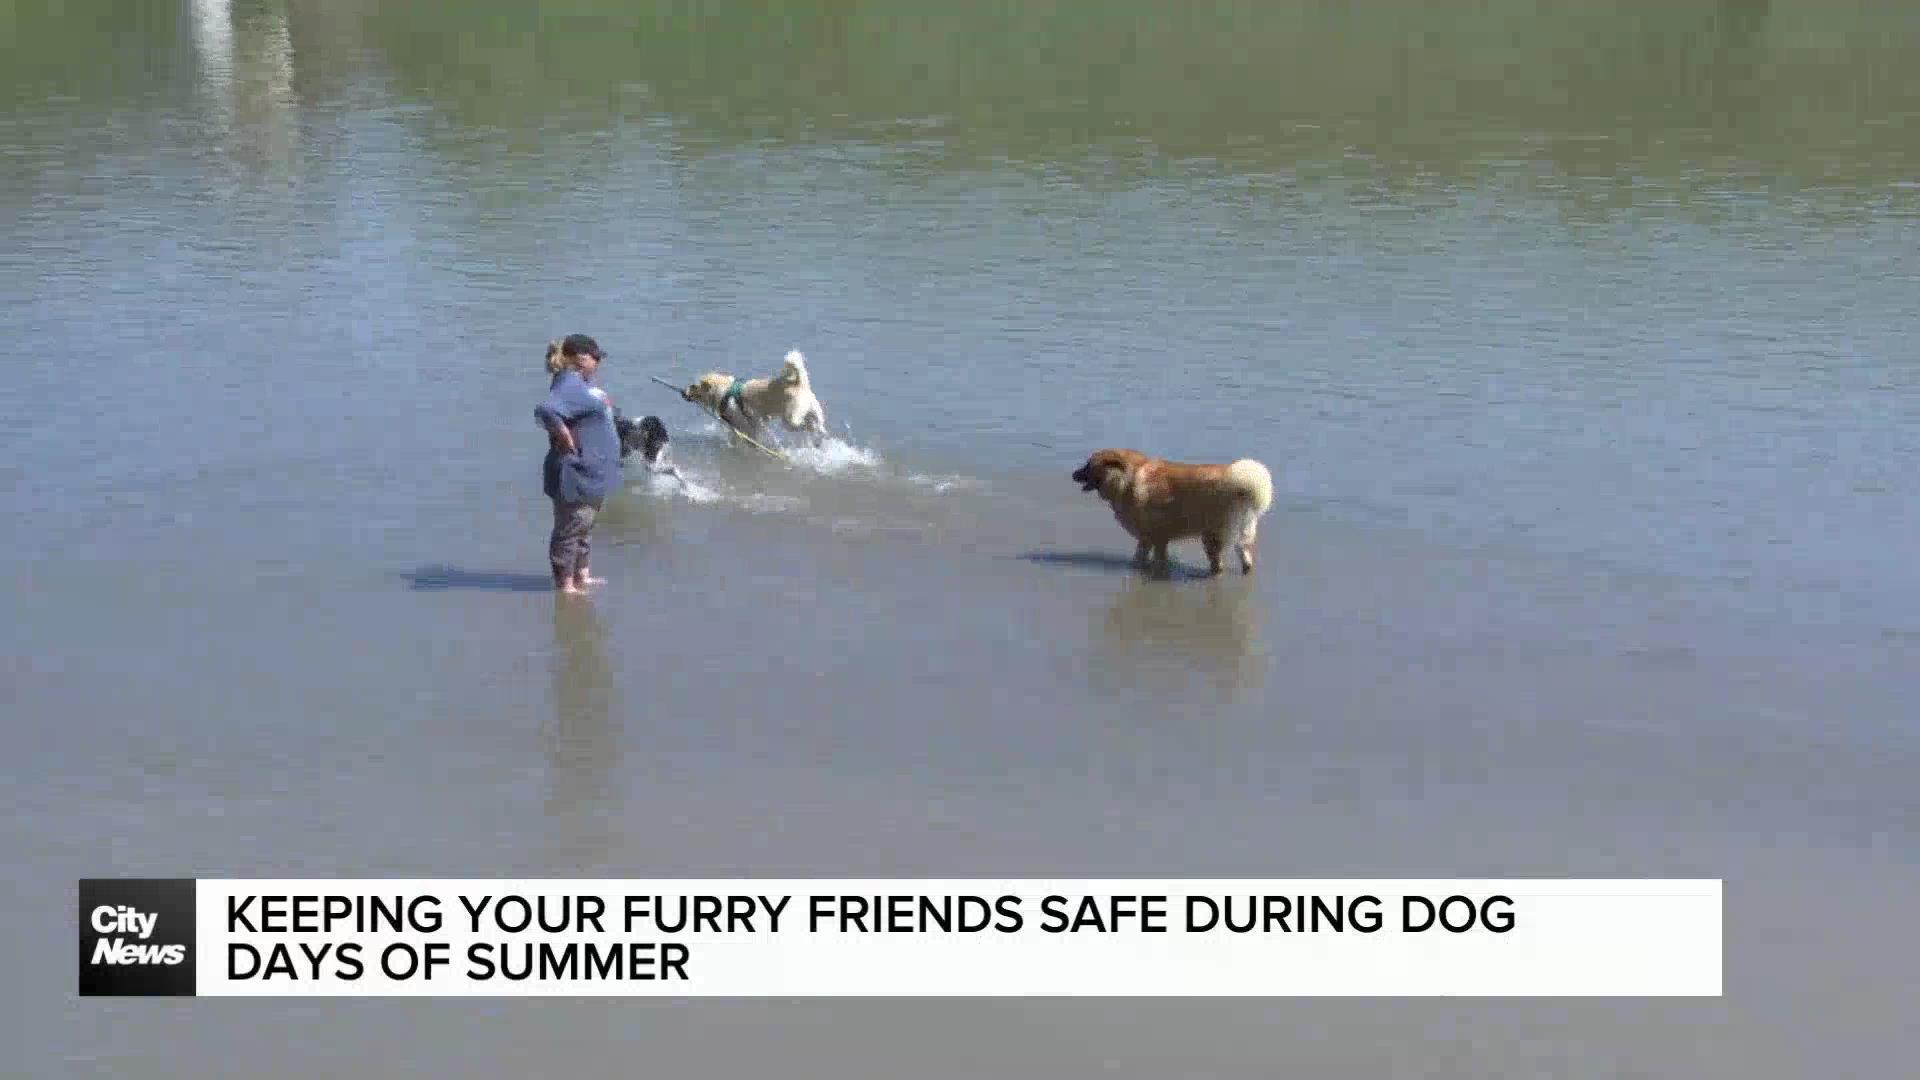 Keeping your pets safe during the dog days of summer